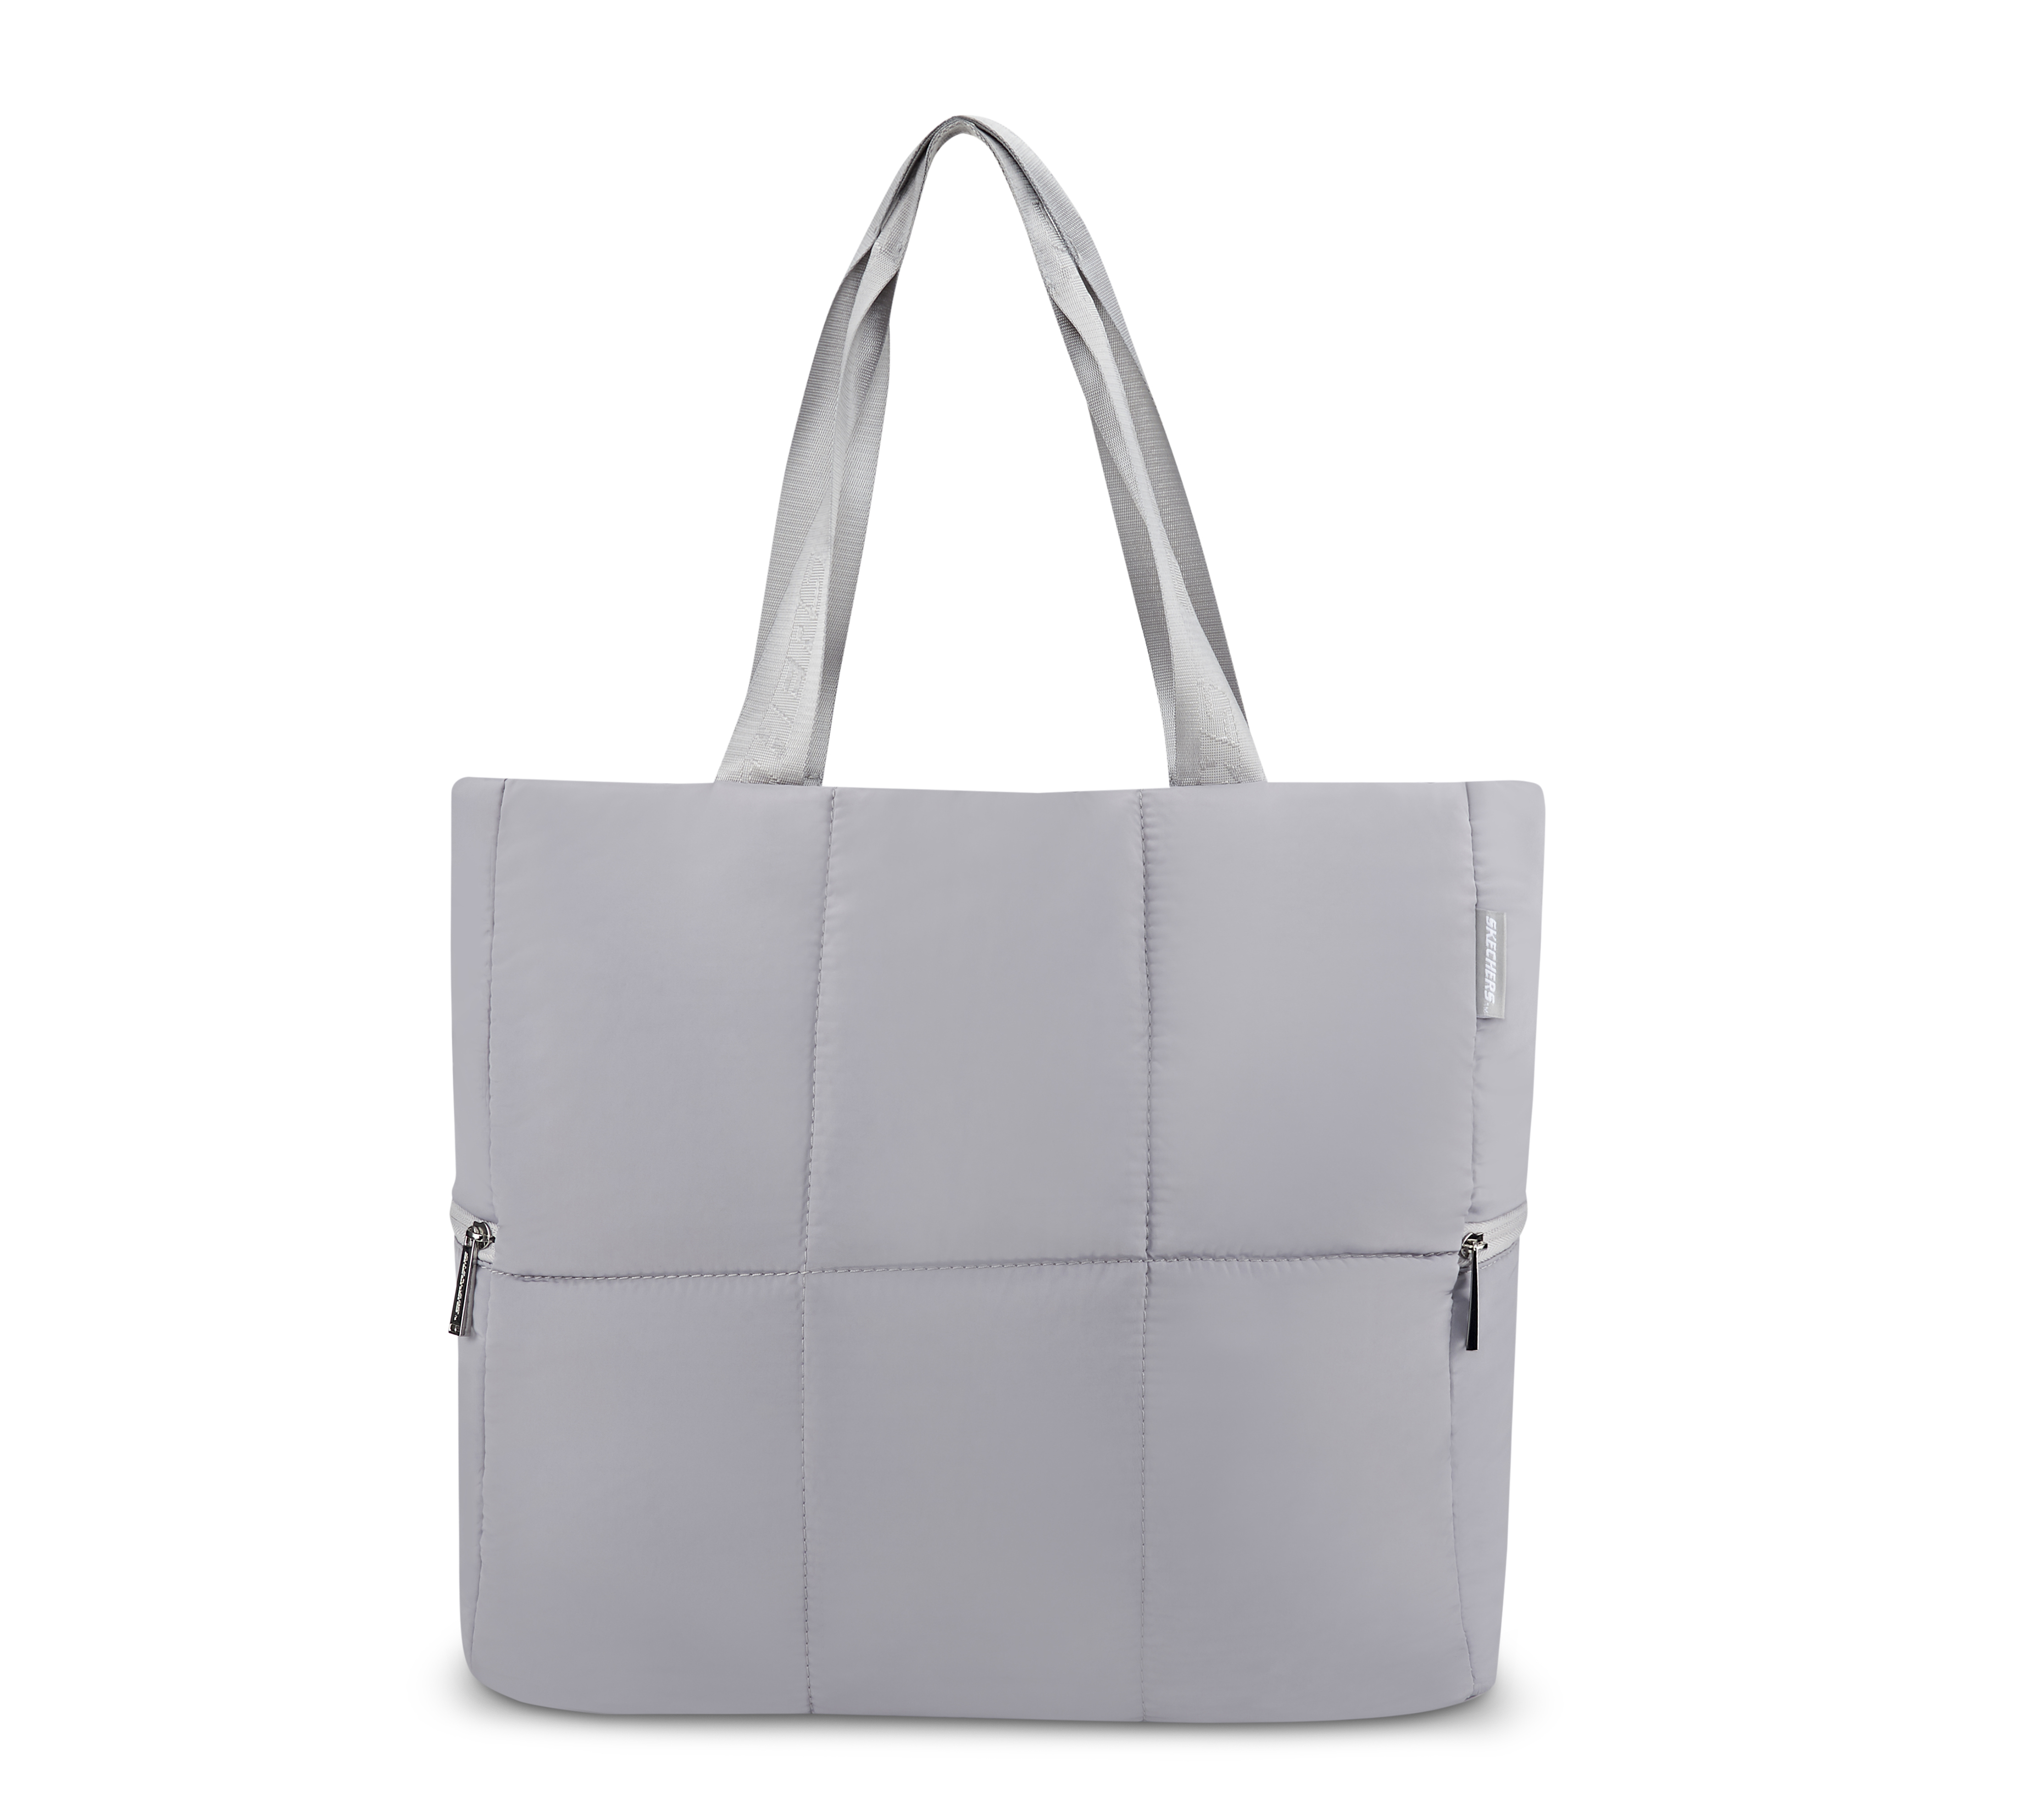 TOTE, GREY Accessories Left View